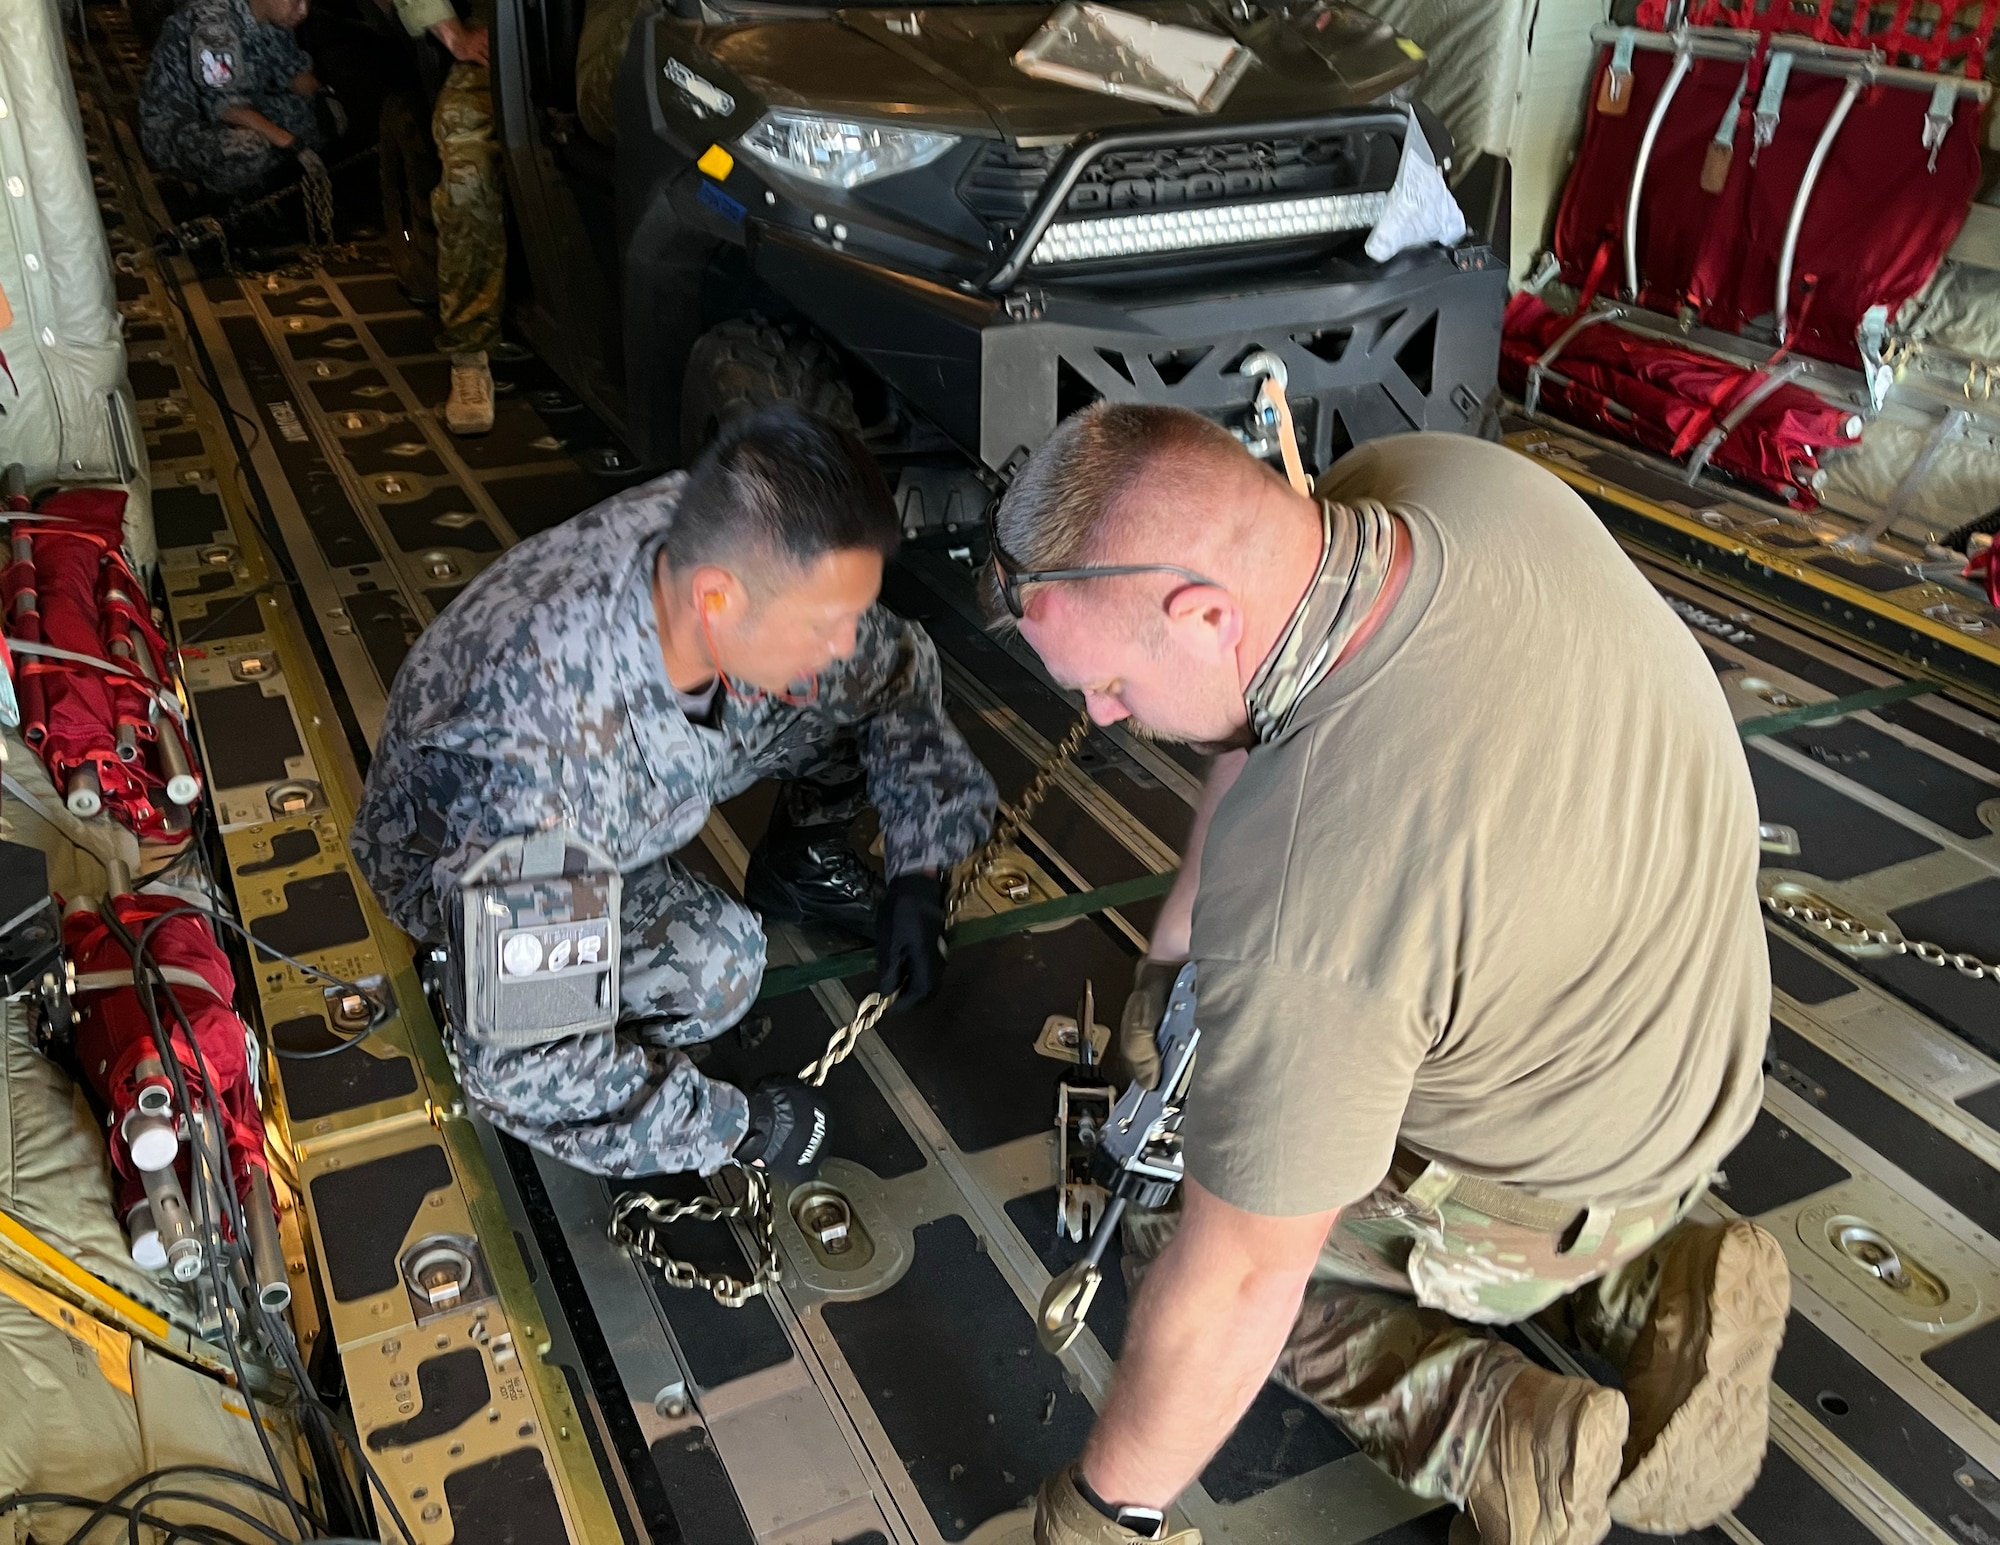 U.S. Air Force Tech. Sgt. Michael Schuette, 133rd Contingency Response Team, works with other contingency response members from Japan to offload a UTV in the Commonwealth of the Northern Marianas Islands, Feb. 13, 2023.